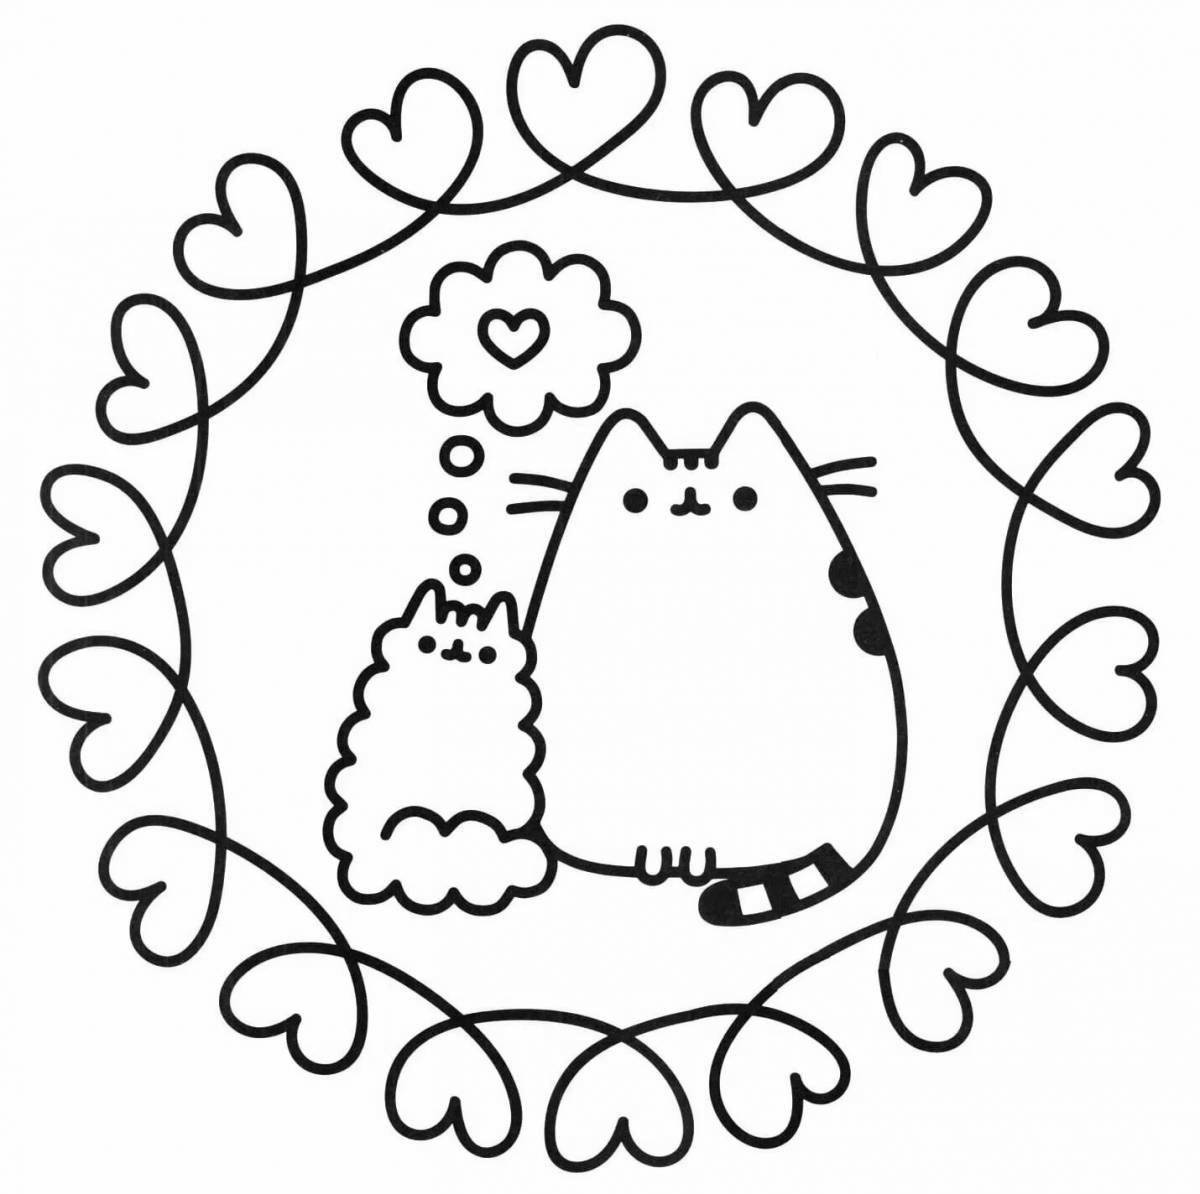 Color-frenzy coloring page pushins